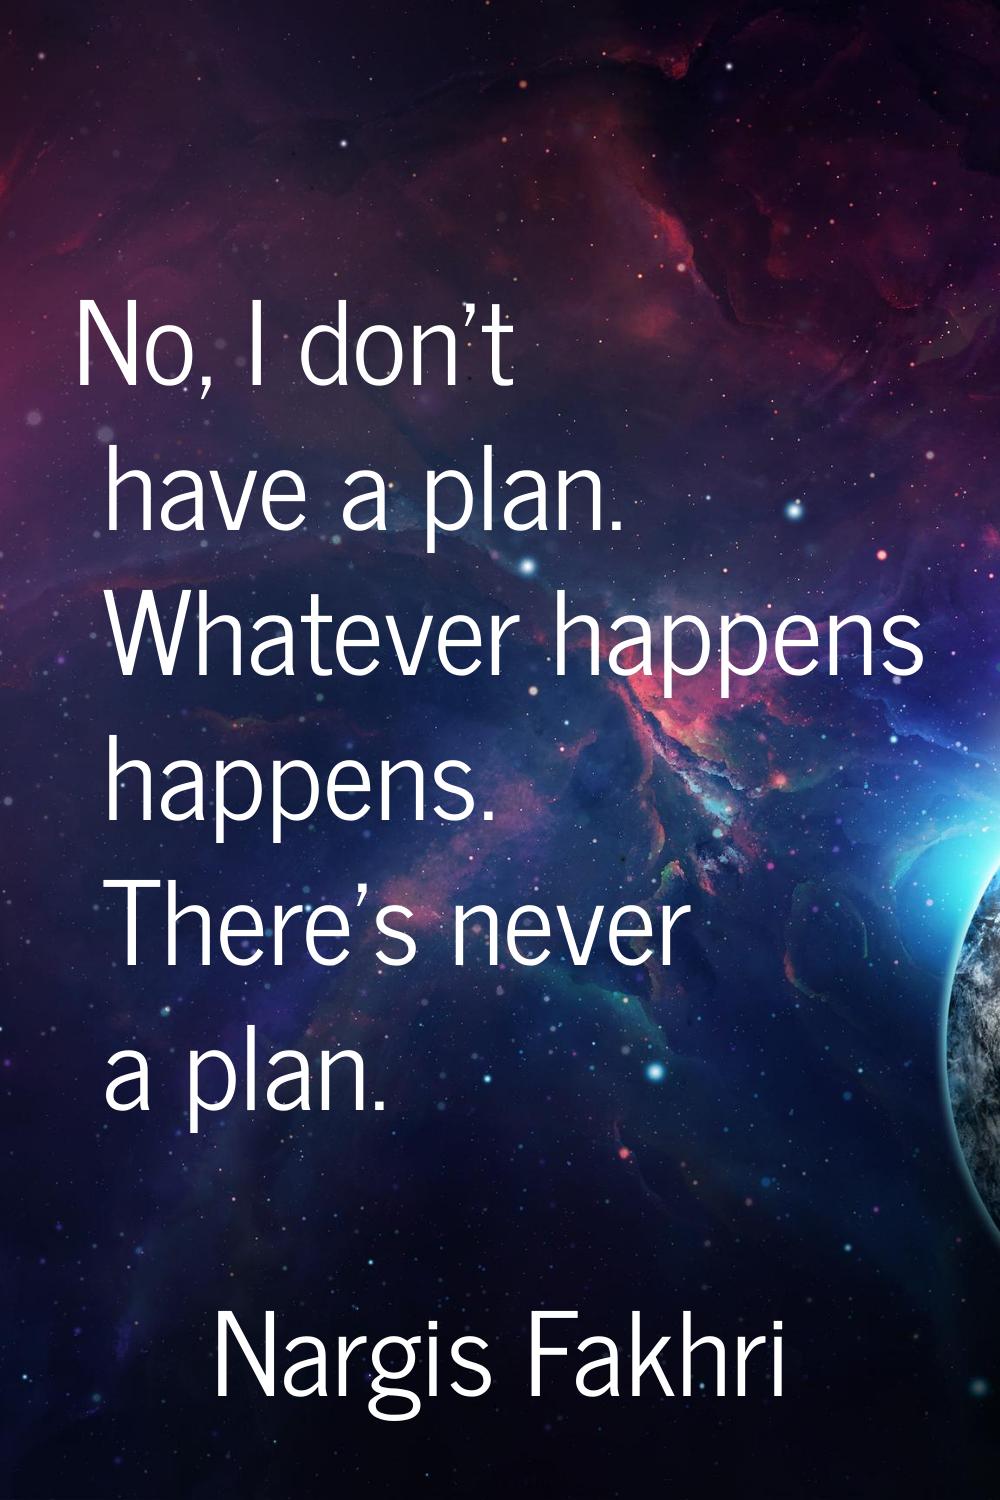 No, I don't have a plan. Whatever happens happens. There's never a plan.